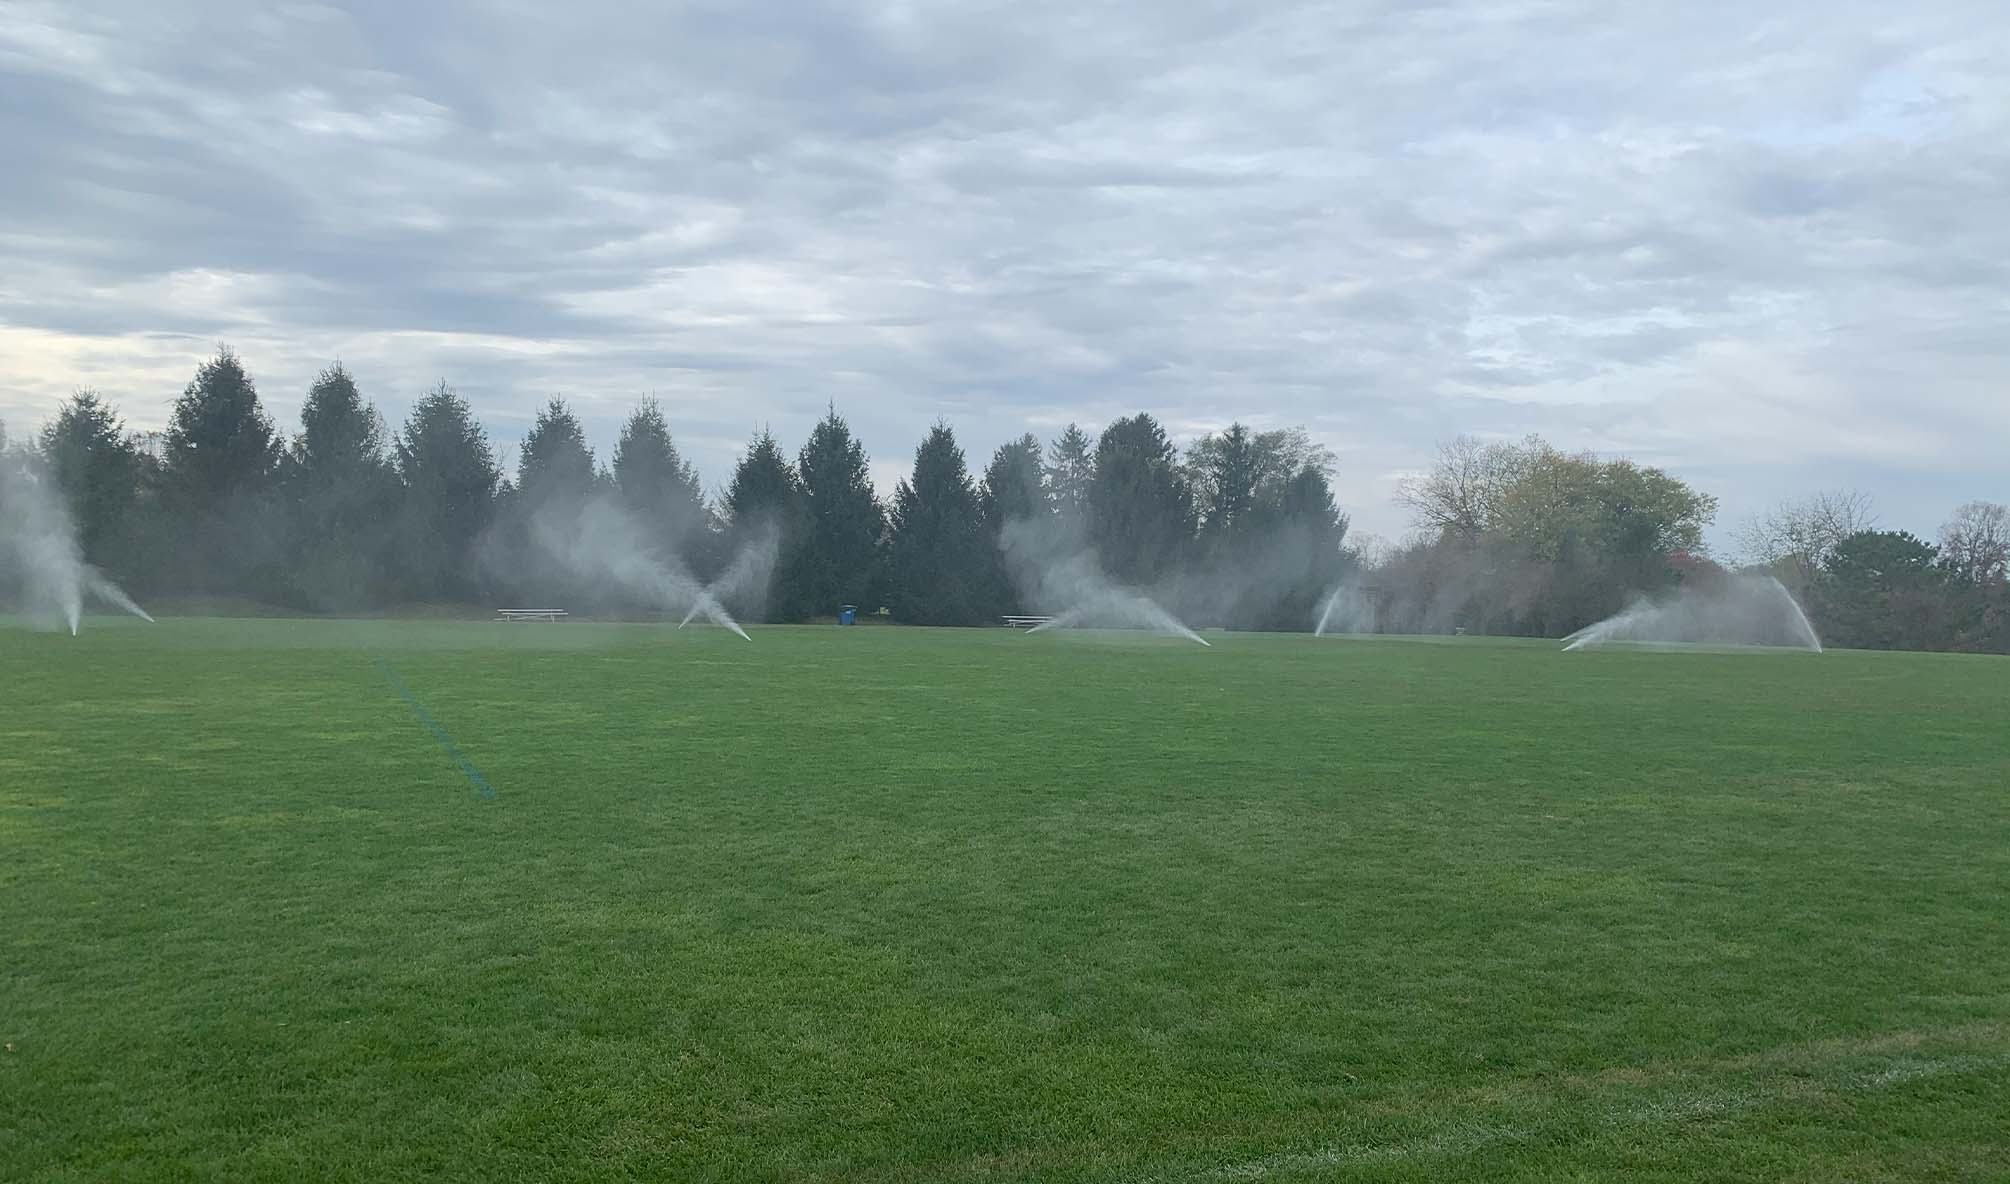 Irrigation Sprinklers Set To On in A Large Grass Field